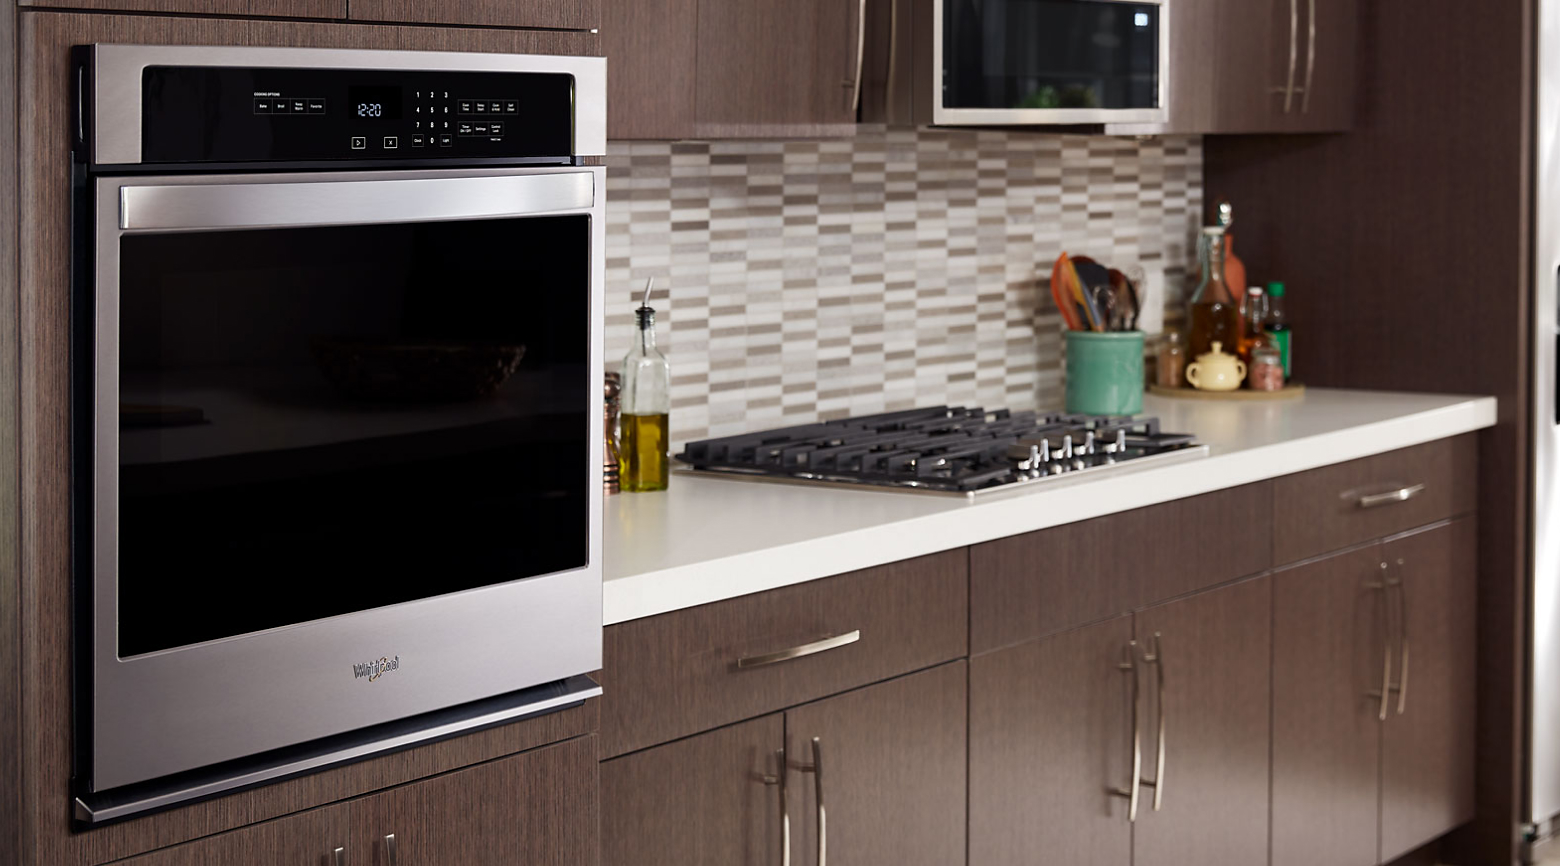 Whirlpool® Wall Oven in a kitchen with gas cooktop